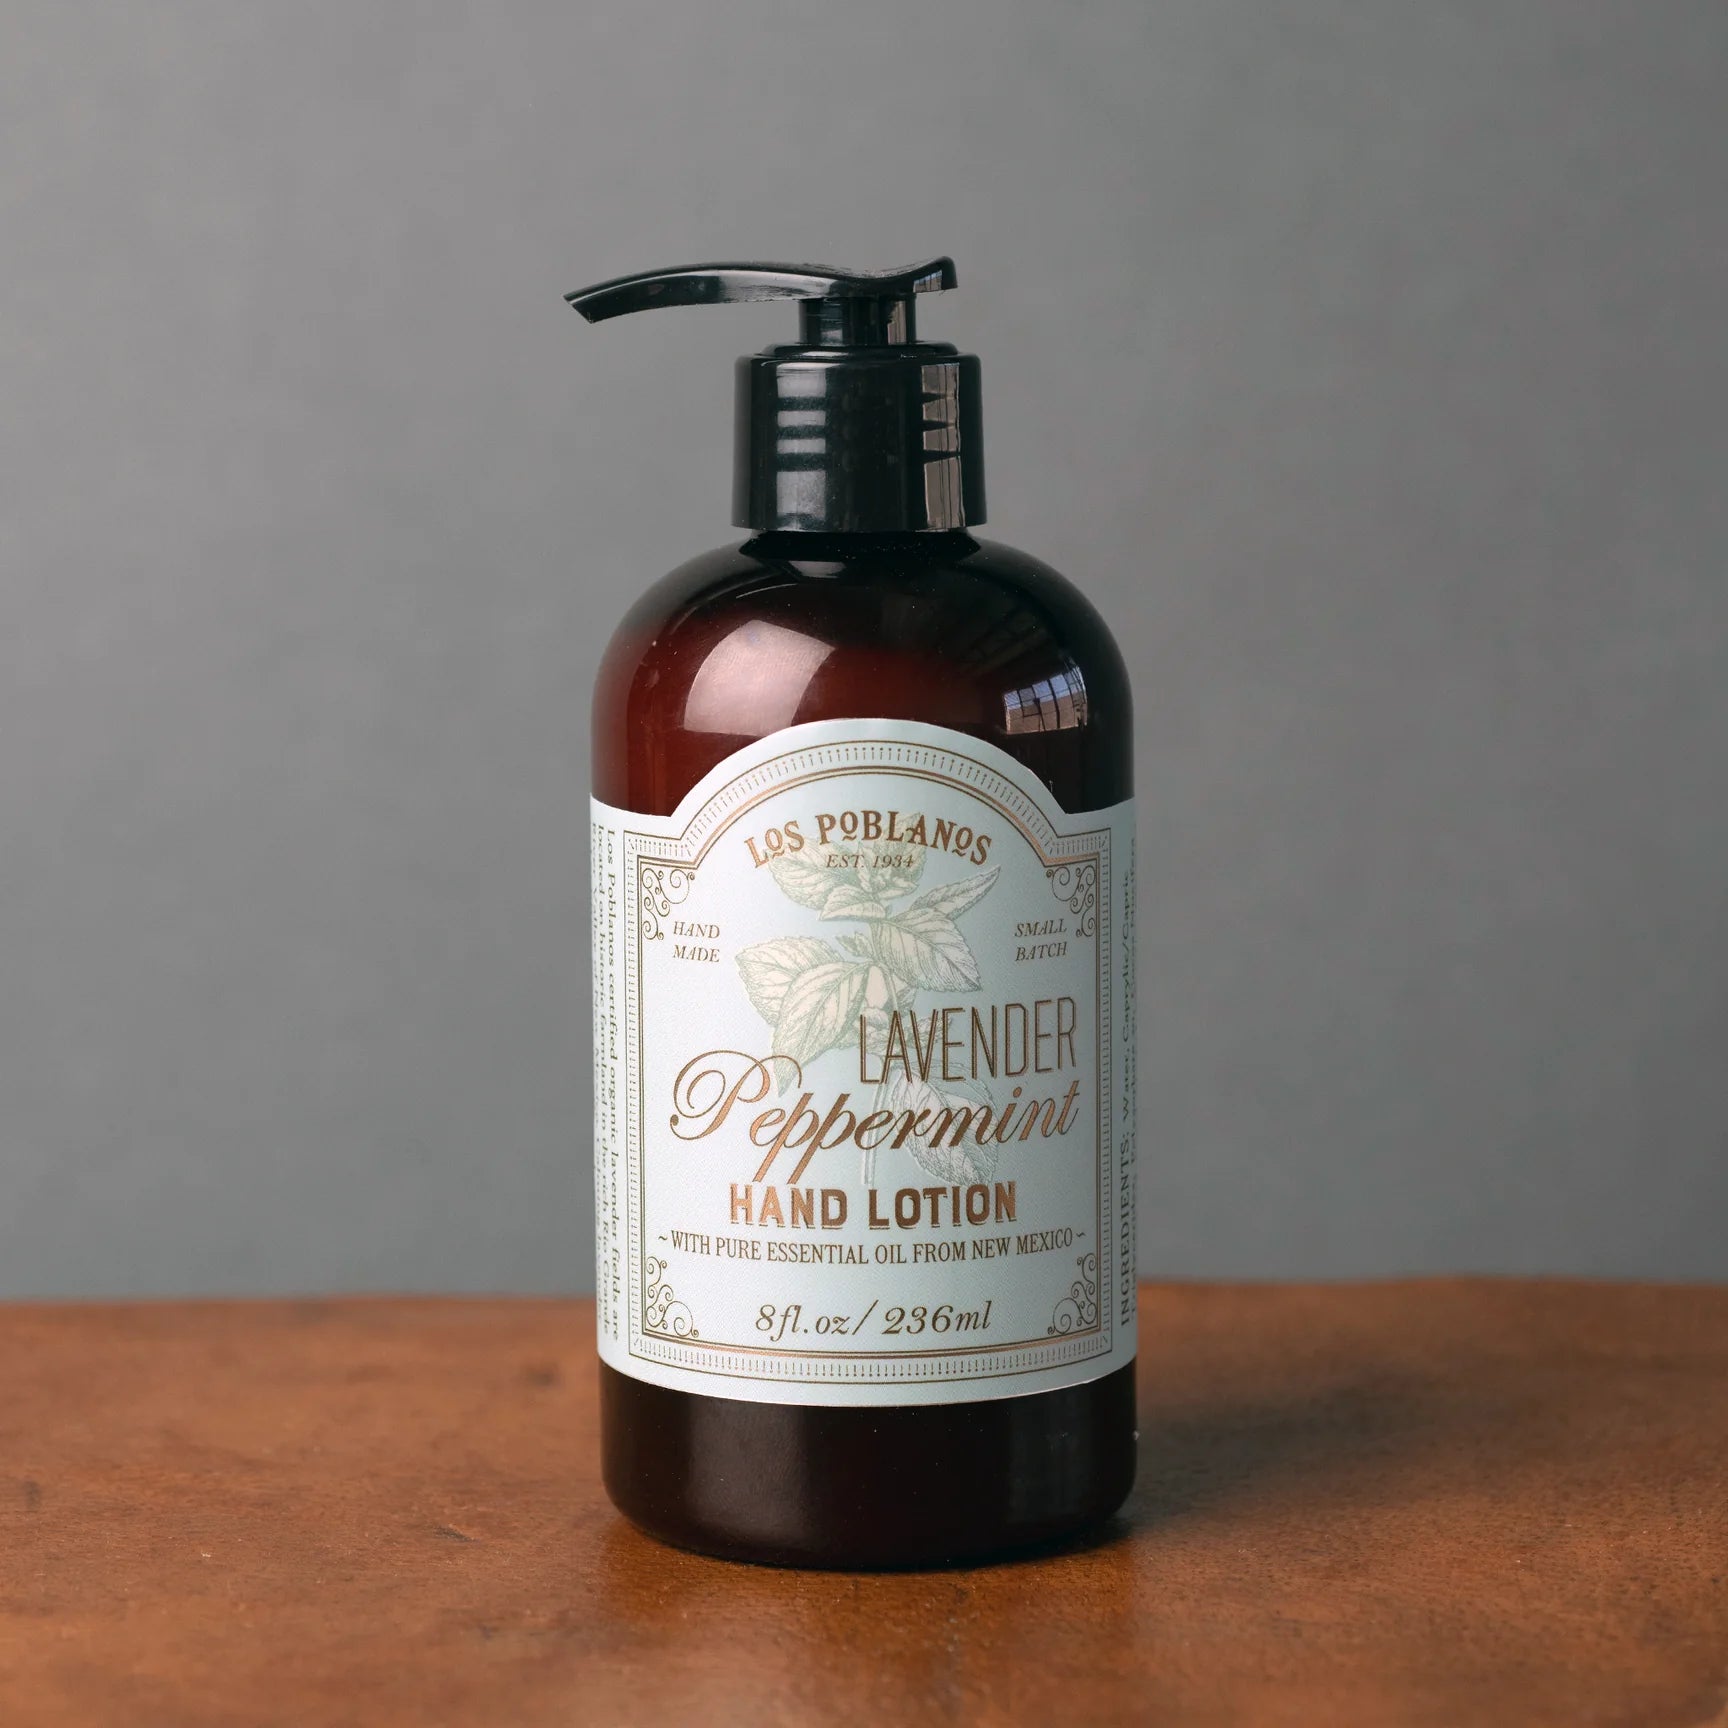 Los Poblanos Lavender Peppermint Hand Lotion